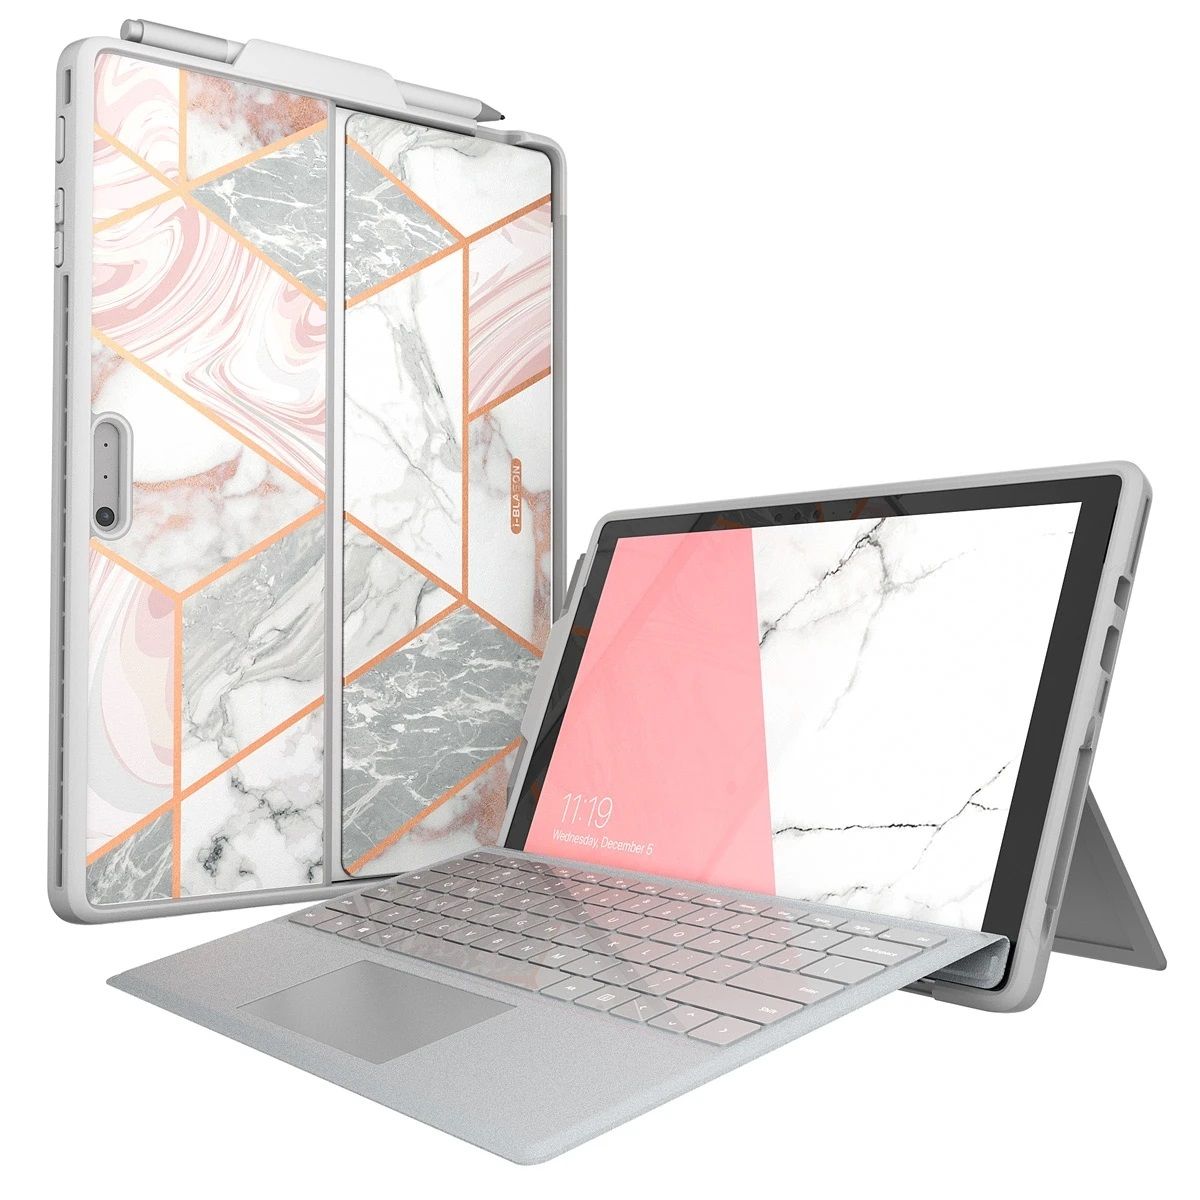 This unique case come with impact-resistant TPU finish that protects the Surface Pro 7 against scratches, bumps, and falls. It also allows access to the device's built-in kickstand and features a slick marble finish for a stylish look.